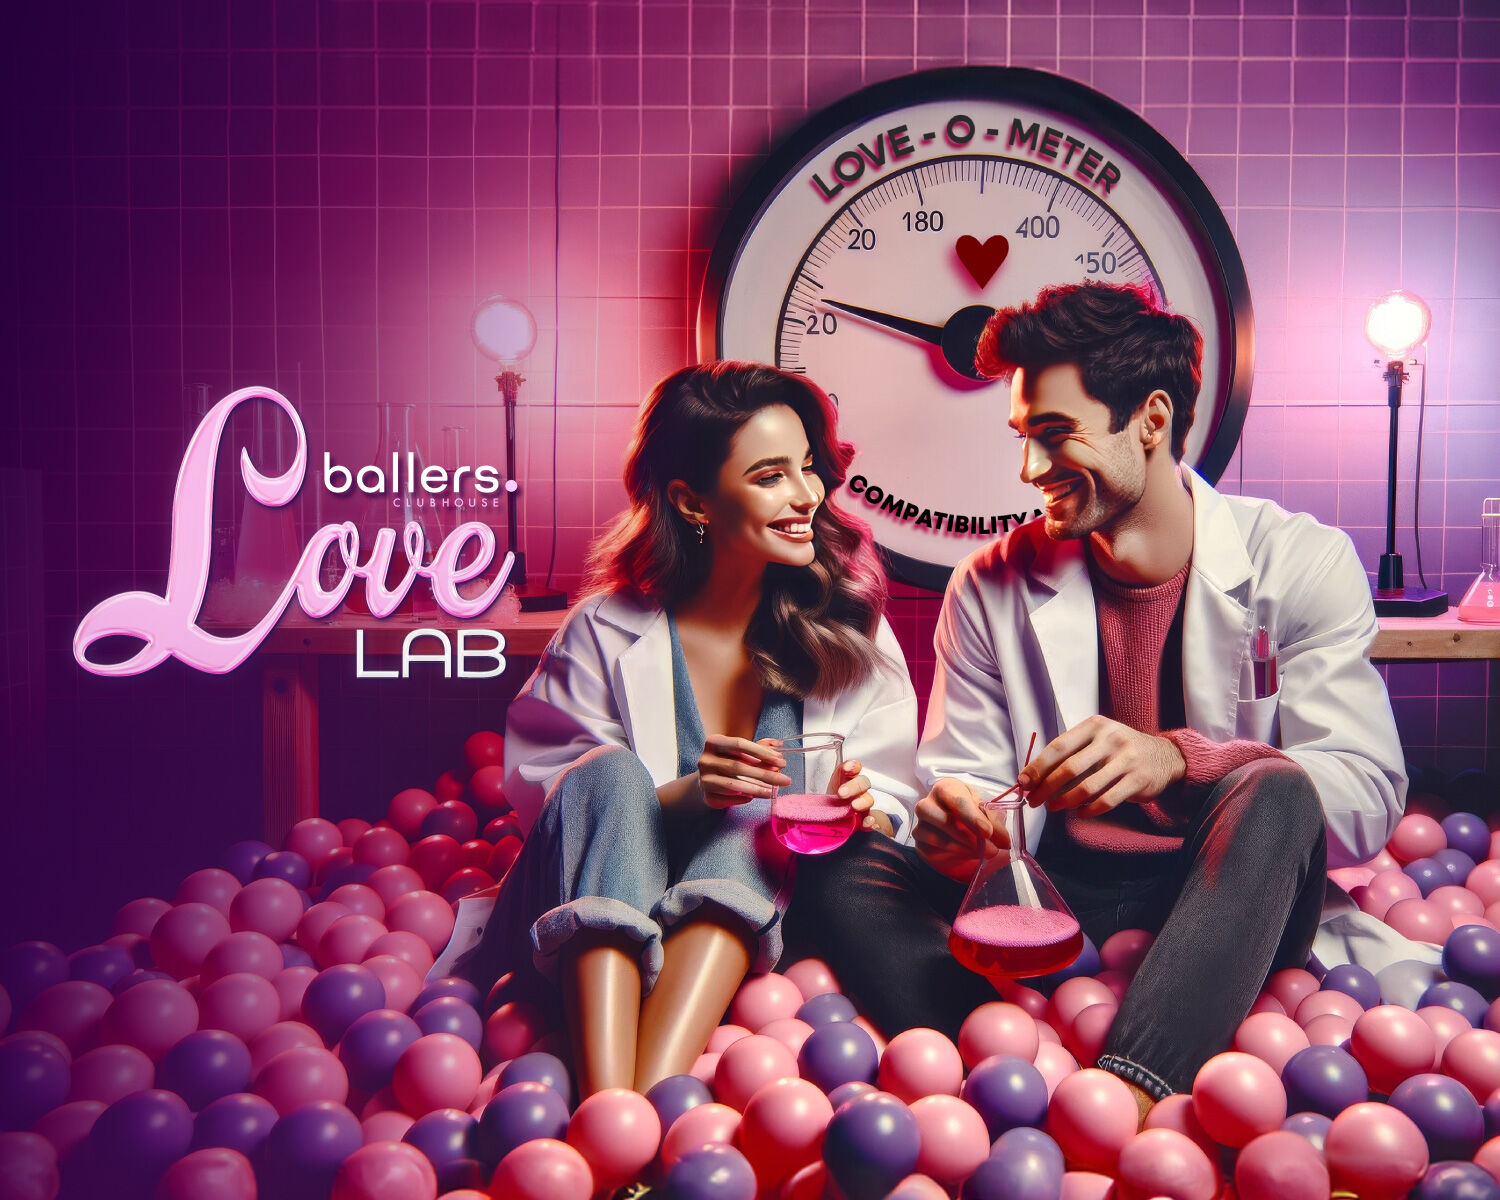 Love lab | Melbourne venue | Cocktail experience | Ballers Clubhouse |